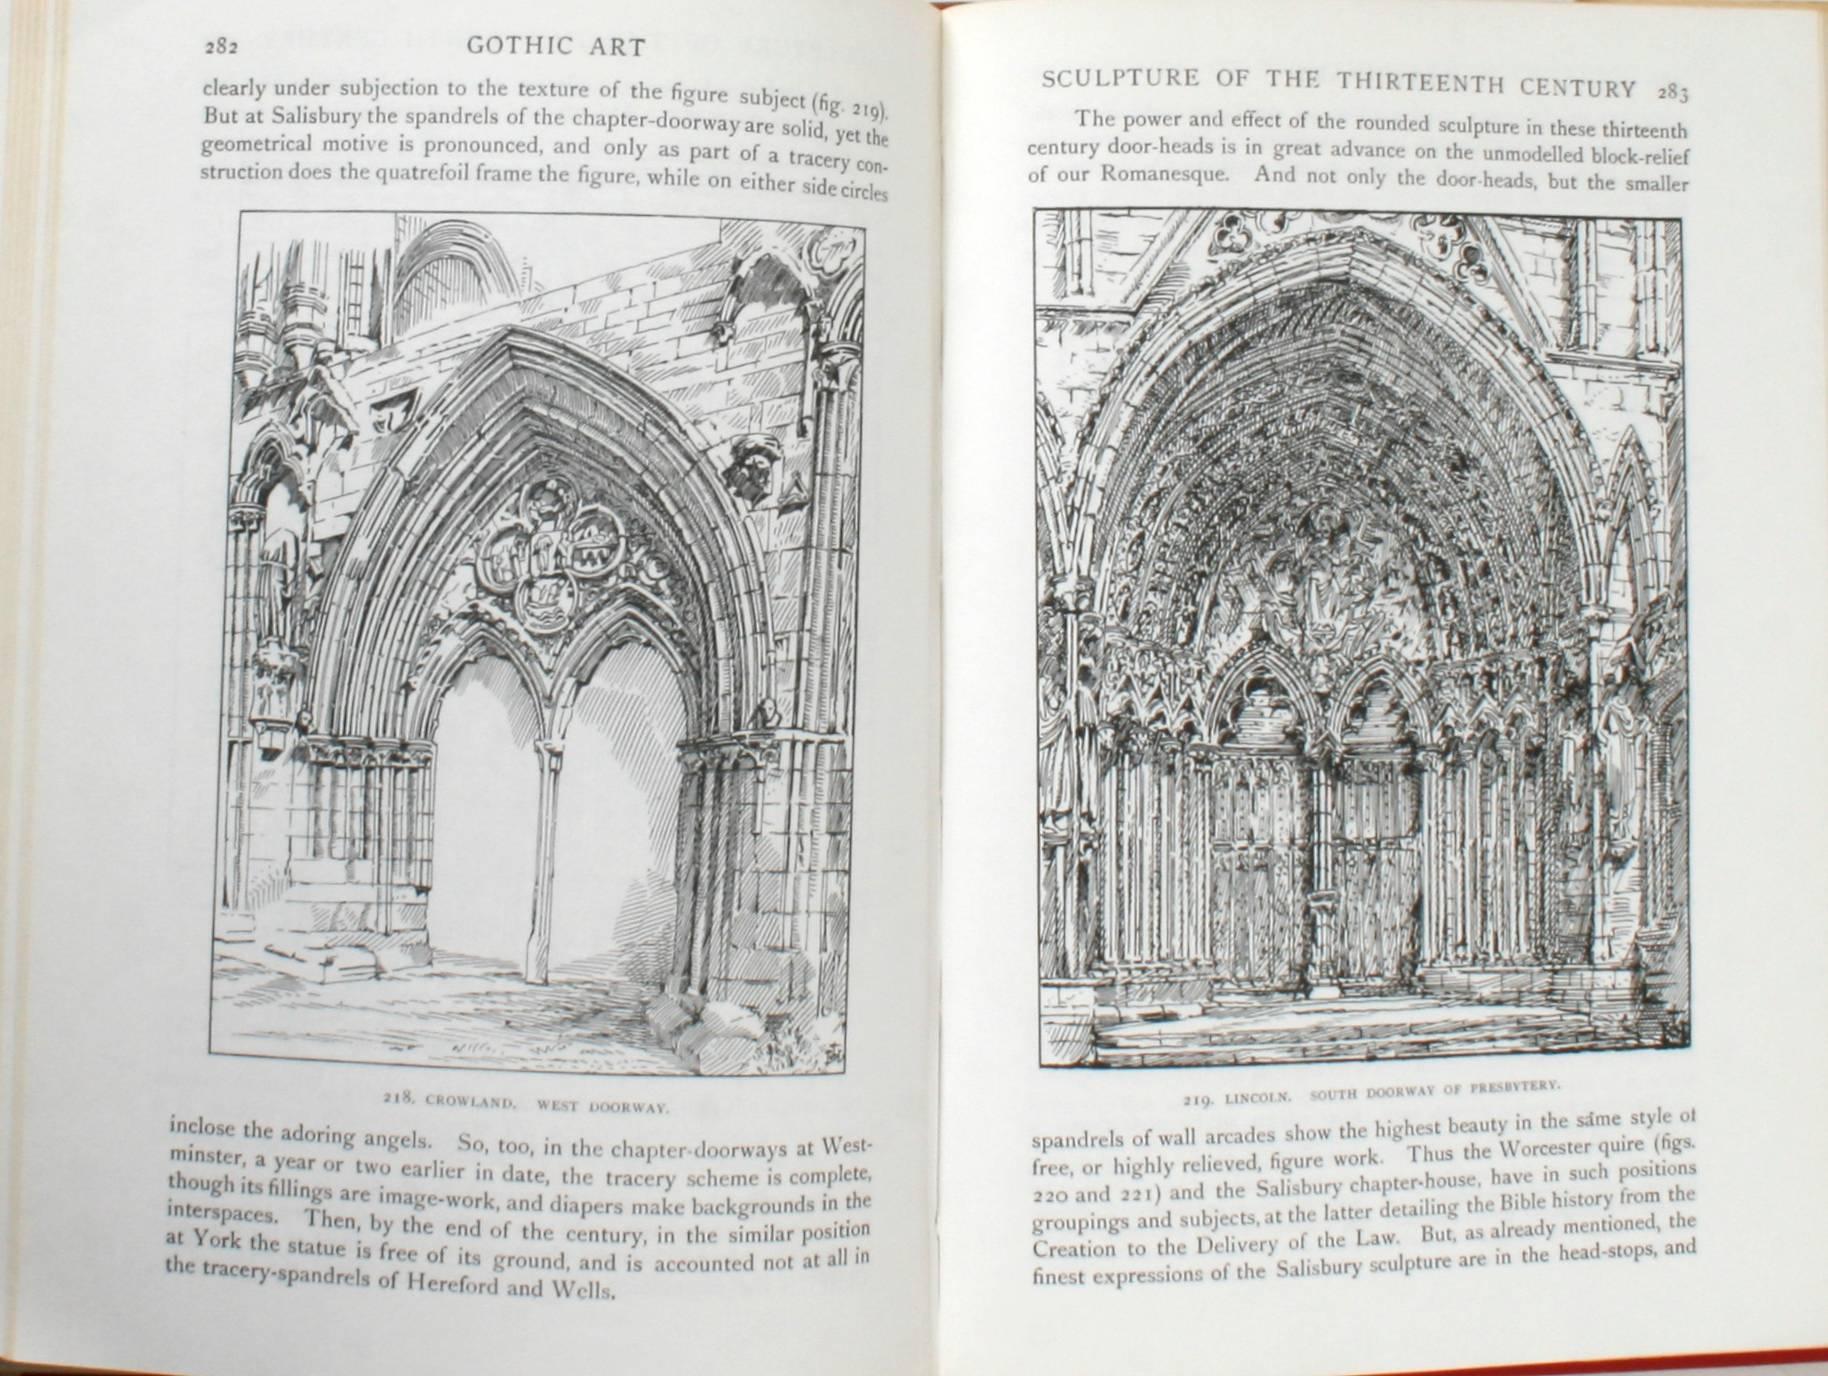 History of Gothic Art in England by Edward S. Prior 1